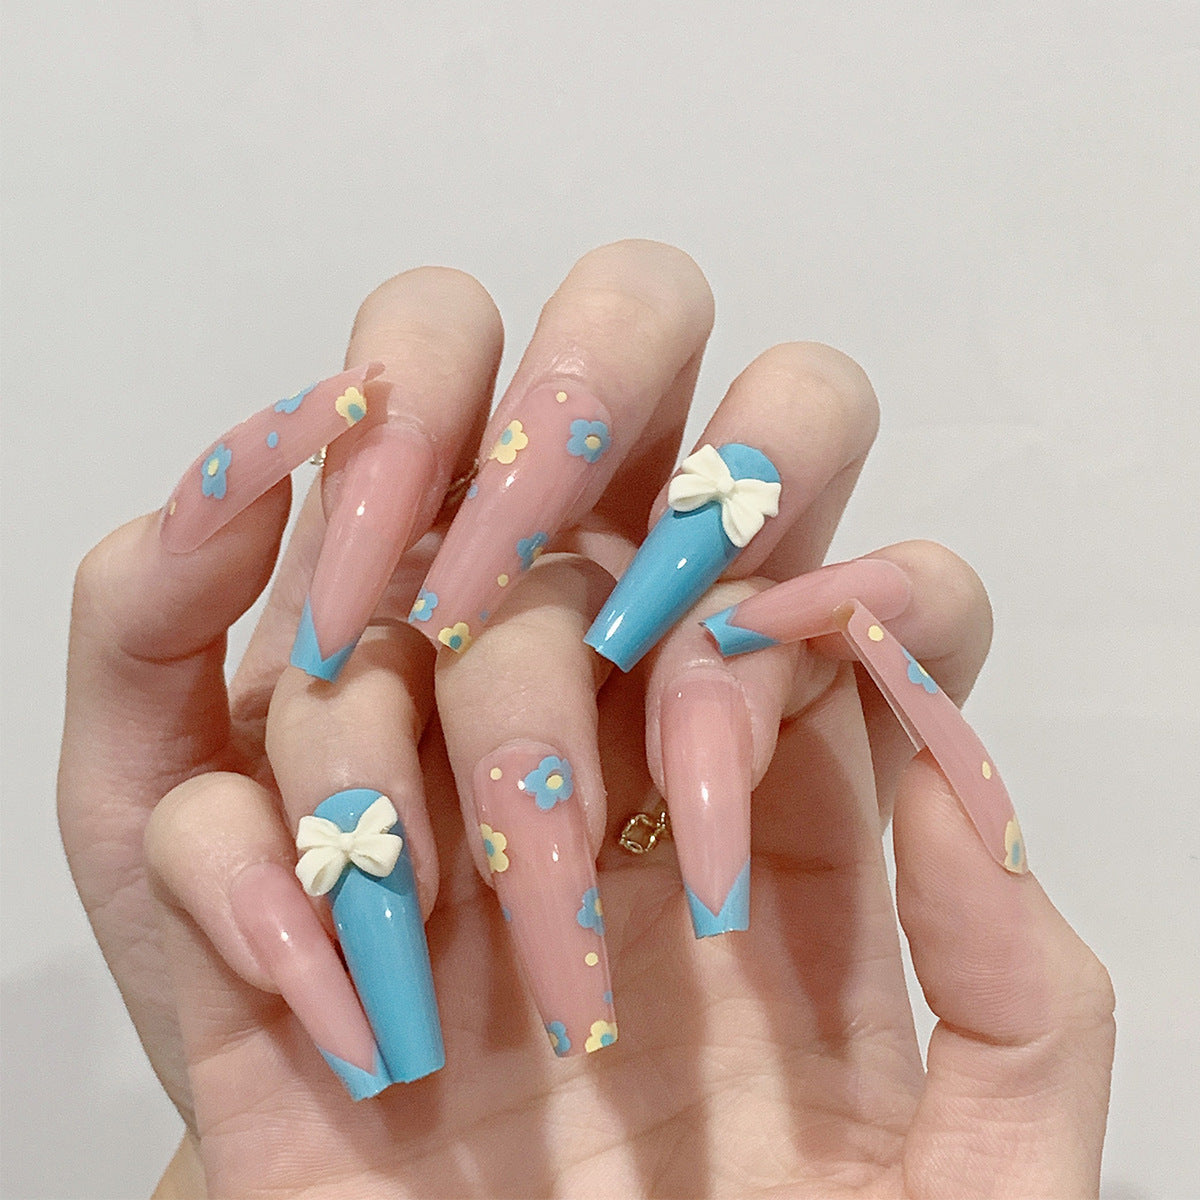 Candypop Press on Nails | Women's Coffin Nails | Galspro